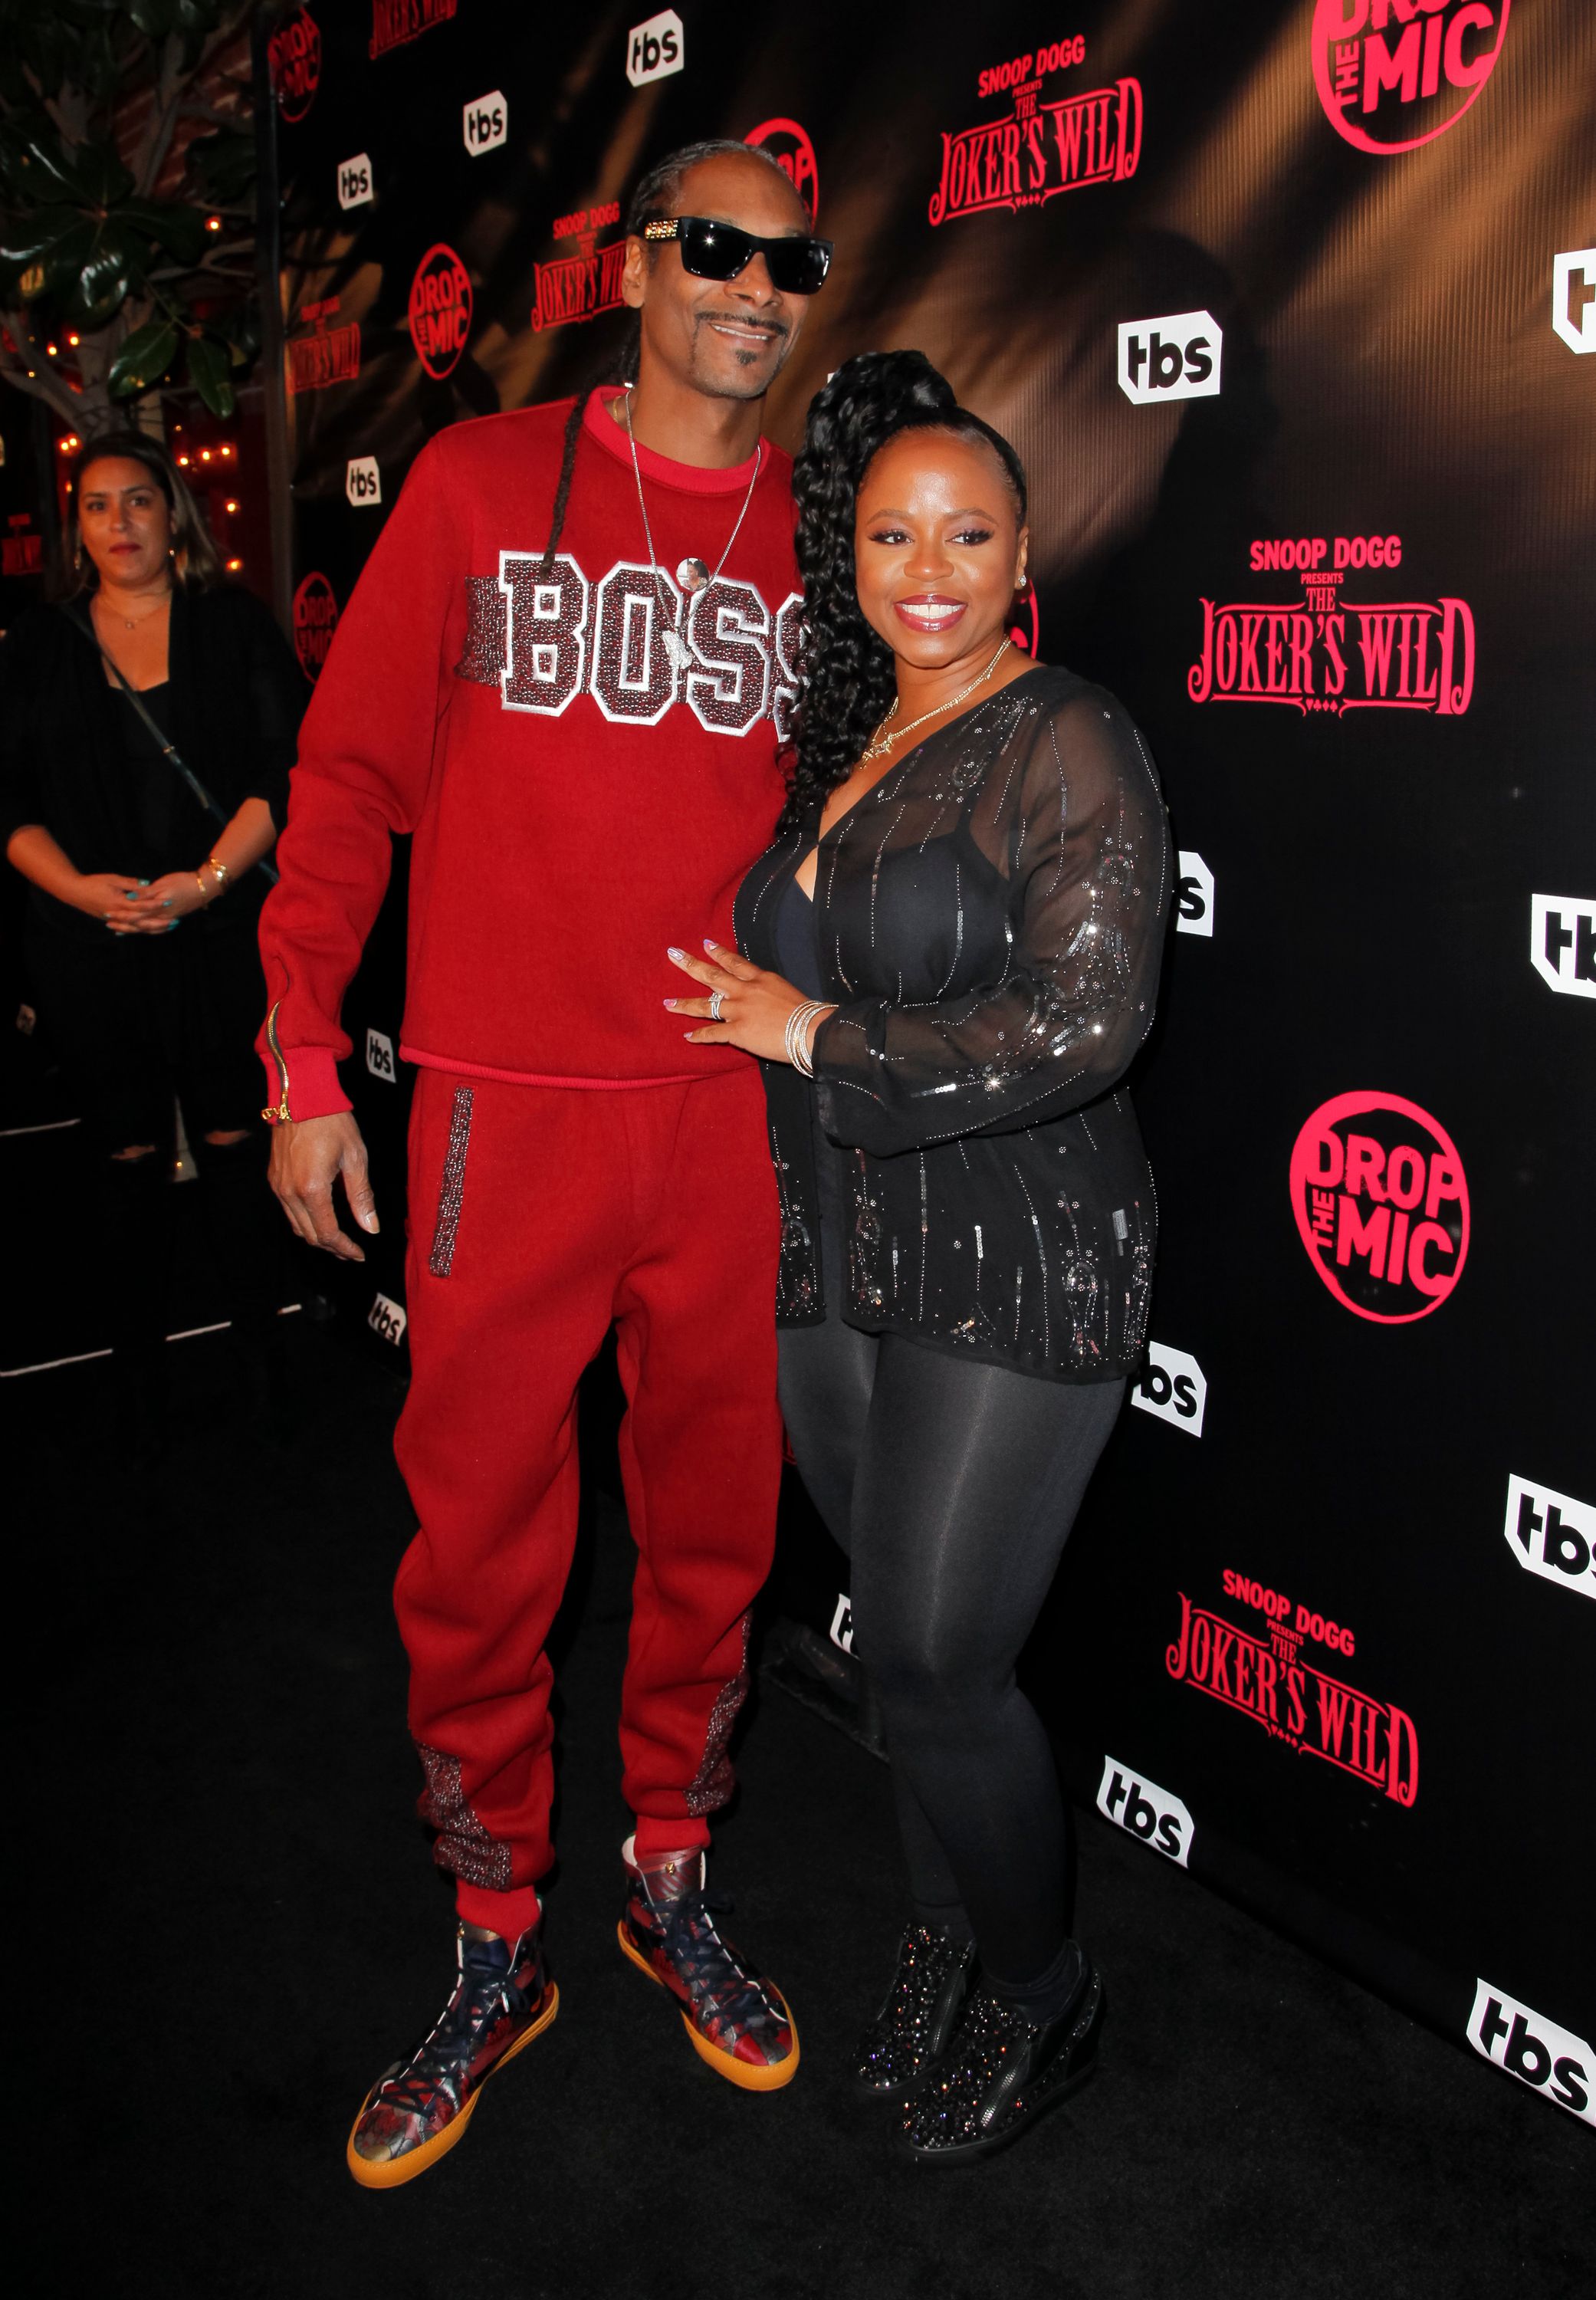 Snoop Dogg and Shante Broadus at the premiere for TBS's "Drop The Mic" and "The Joker's Wild" on October 11, 2017 | Photo: Getty Images